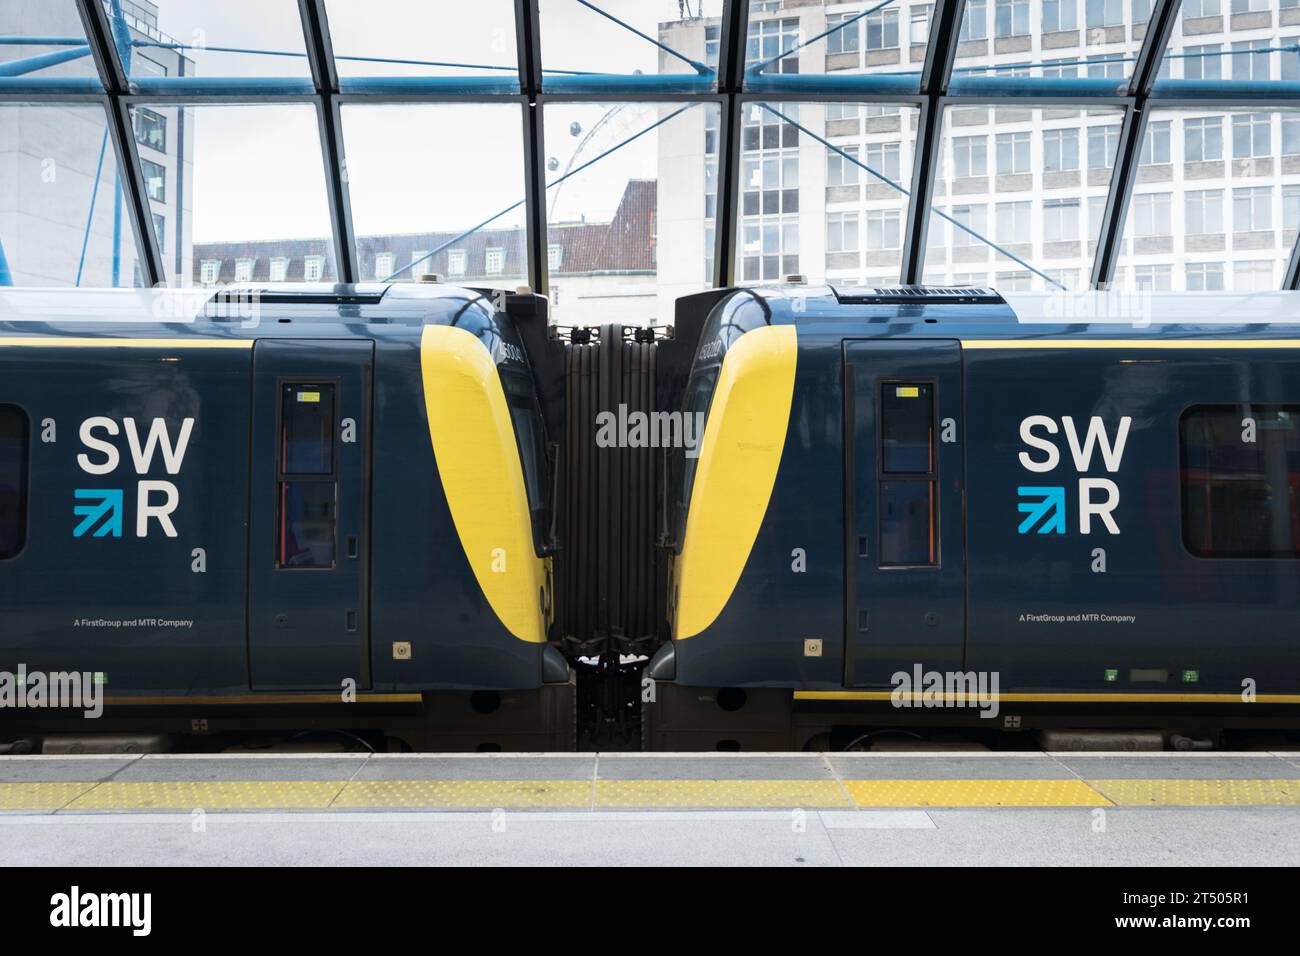 South West Railway carriages and livery colours at Waterloo Station, LOndon, England, U.K. Stock Photo